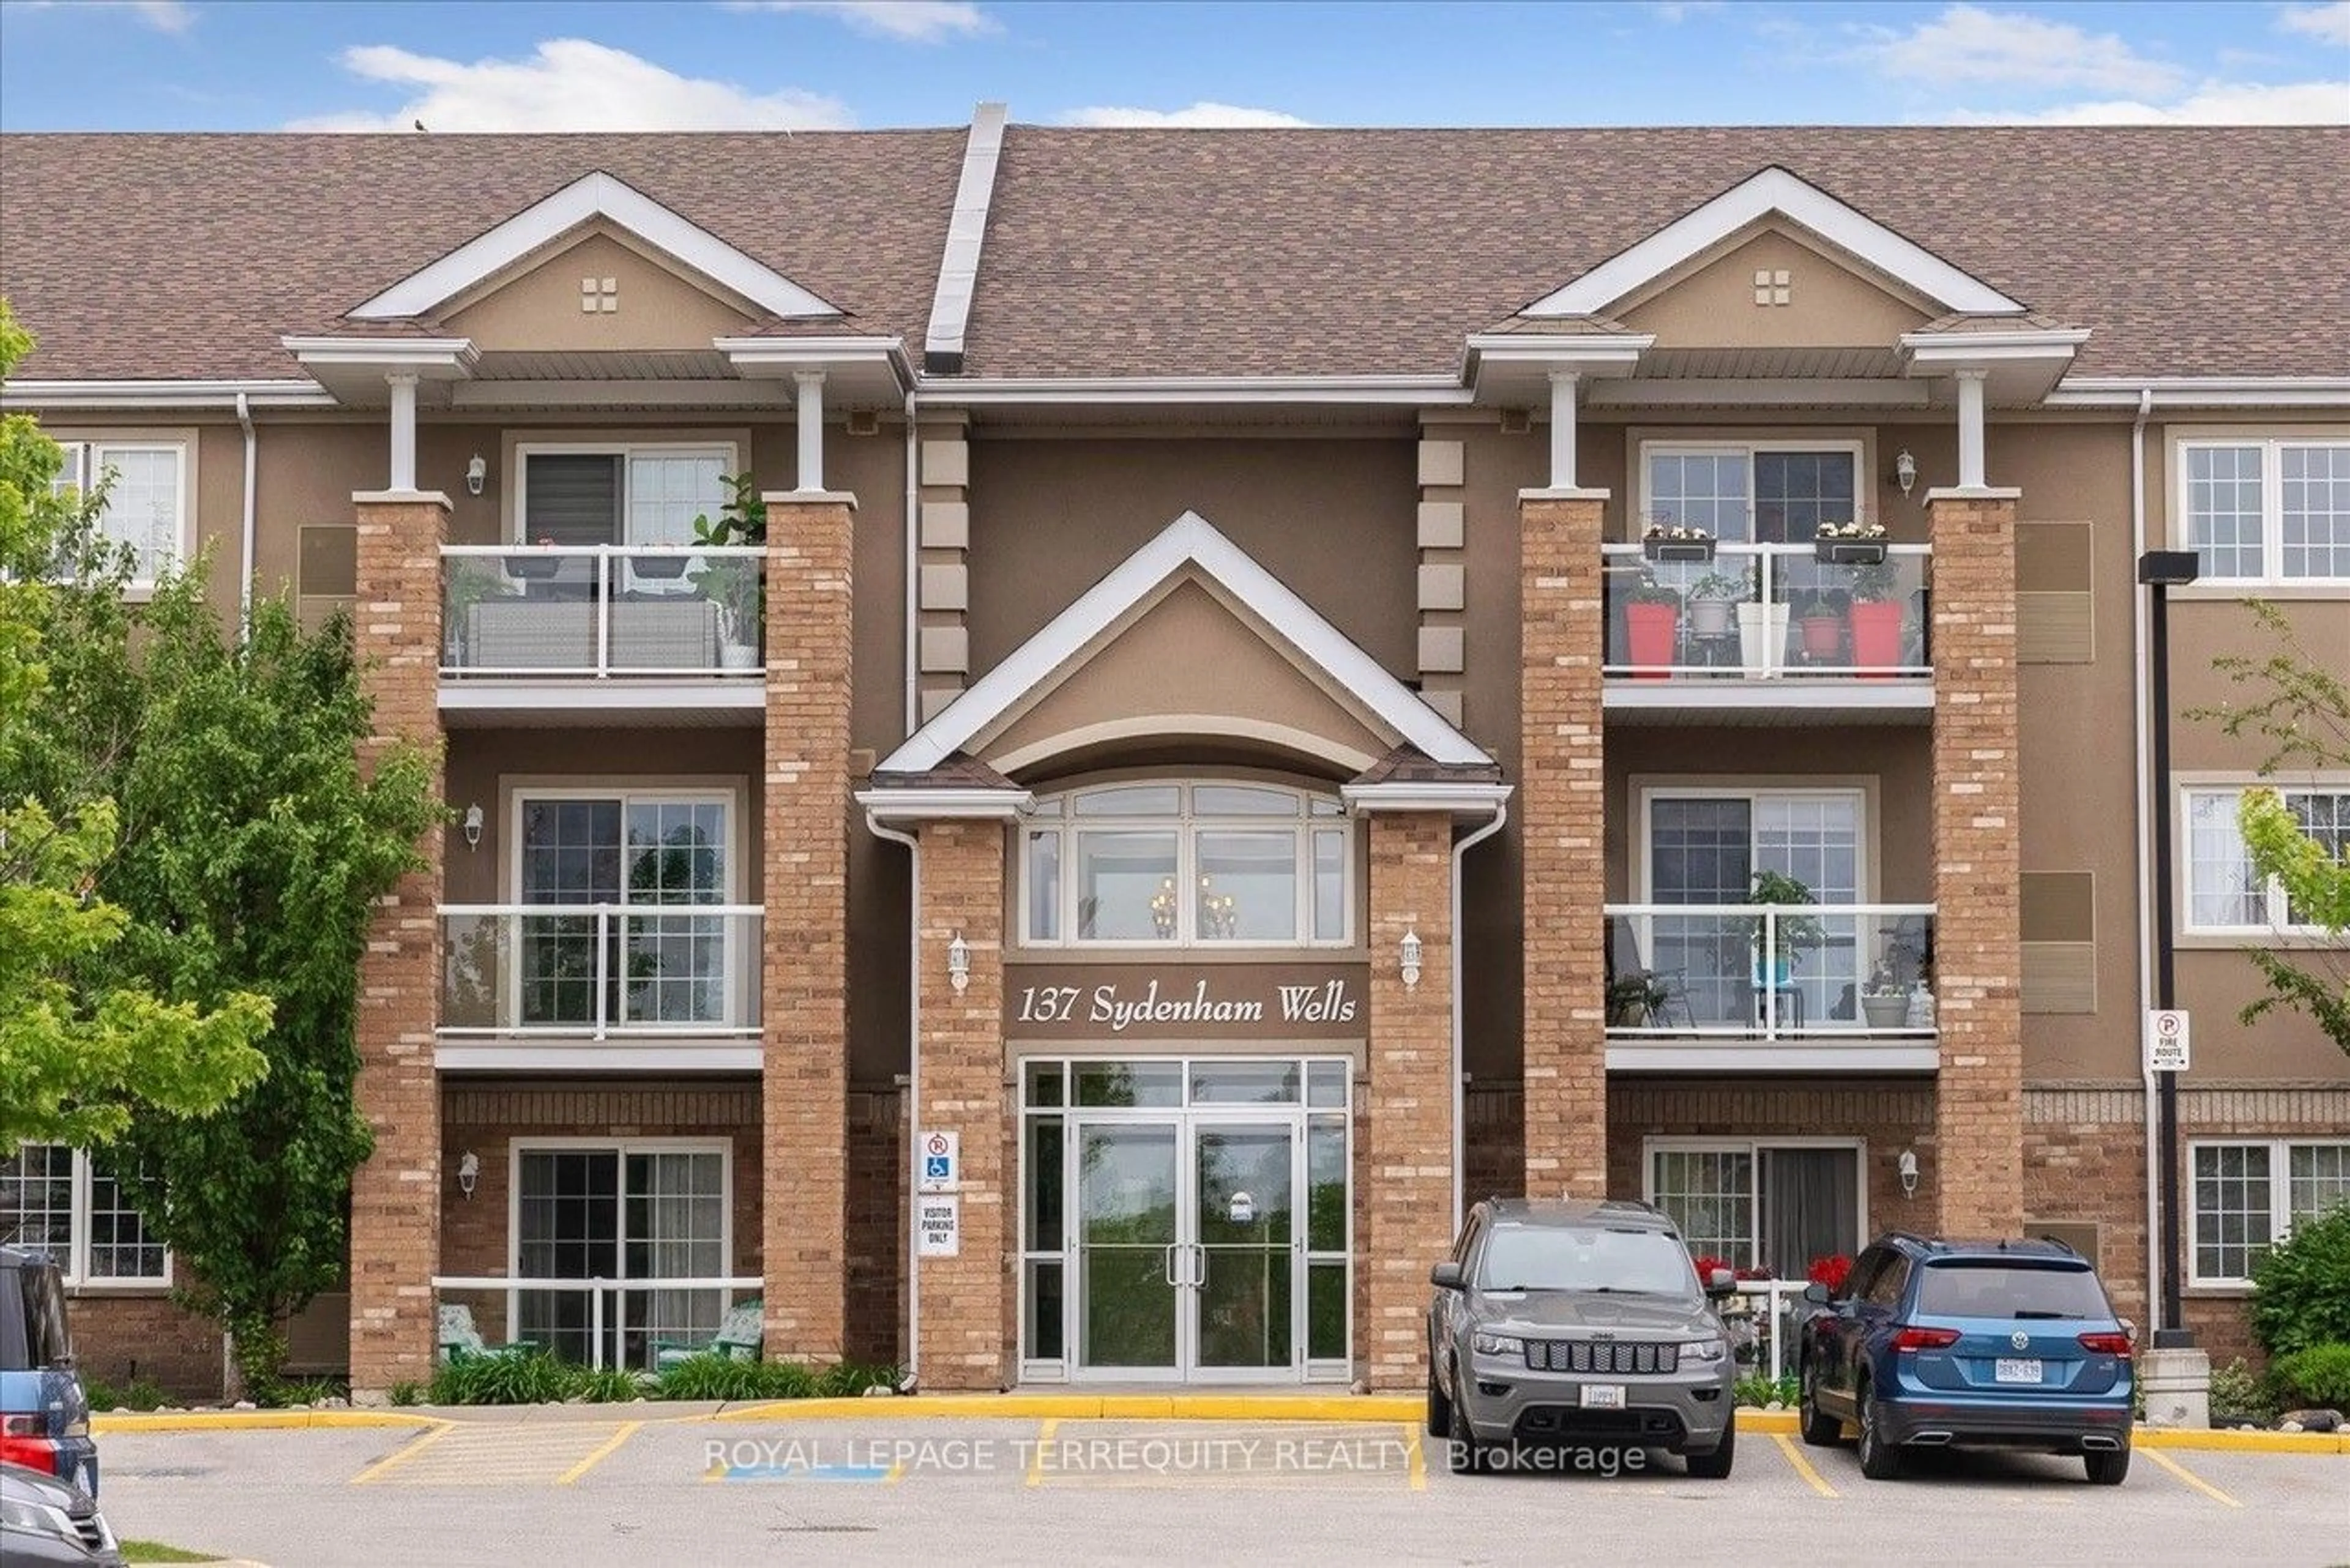 A pic from exterior of the house or condo for 137 Sydenham Wells #12, Barrie Ontario L4M 0G7